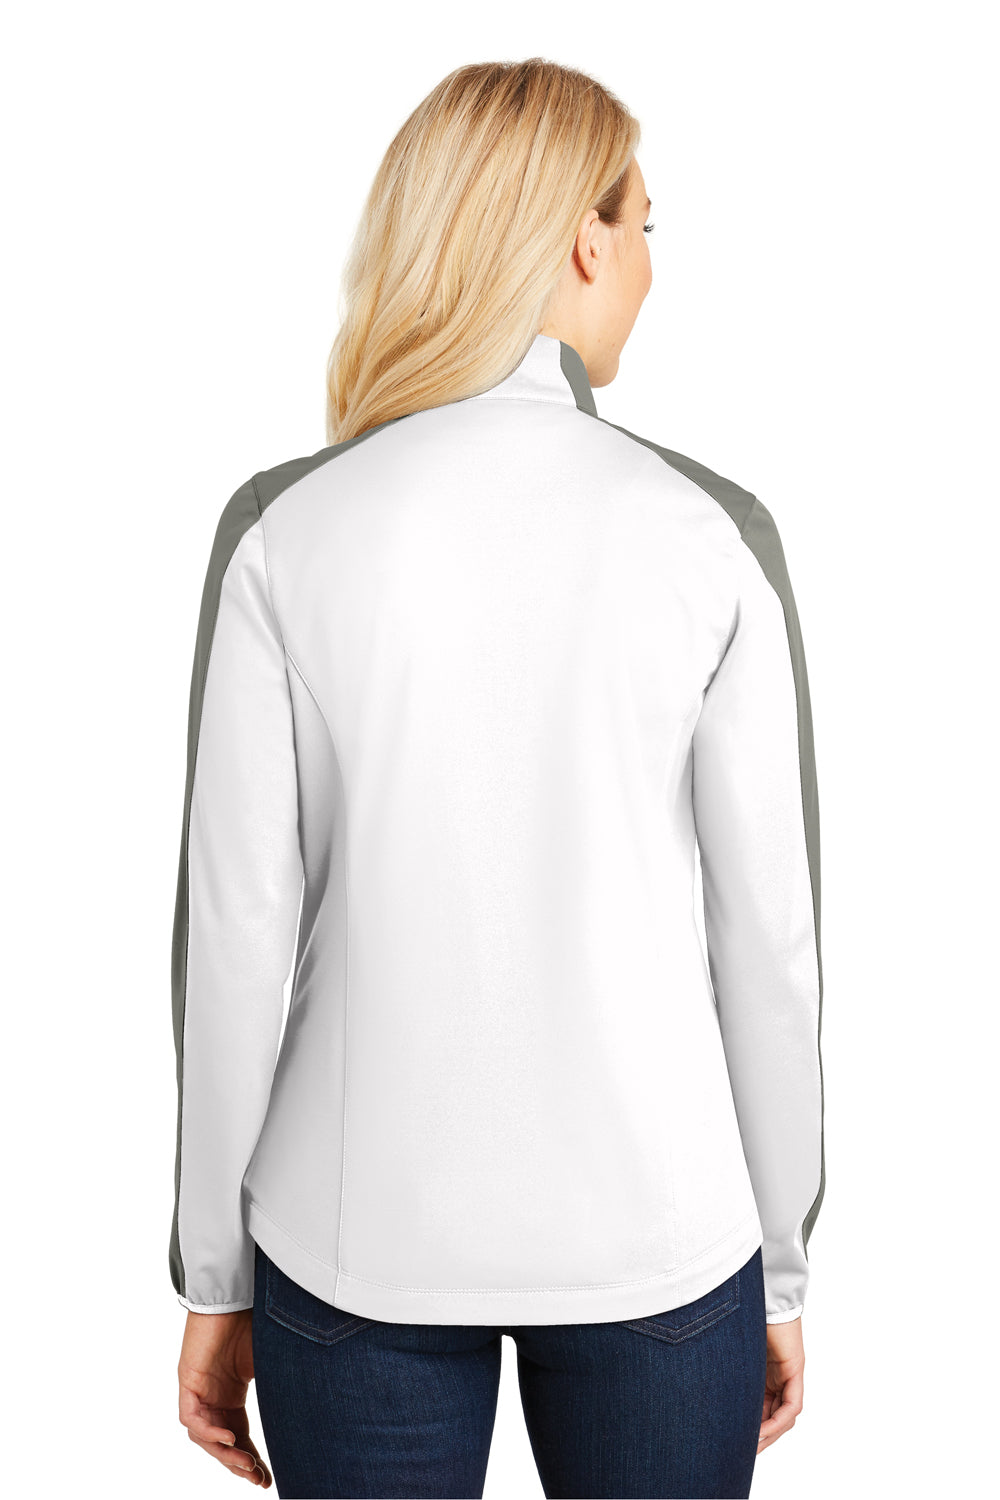 Port Authority L718 Womens Active Wind & Water Resistant Full Zip Jacket White/Grey Back